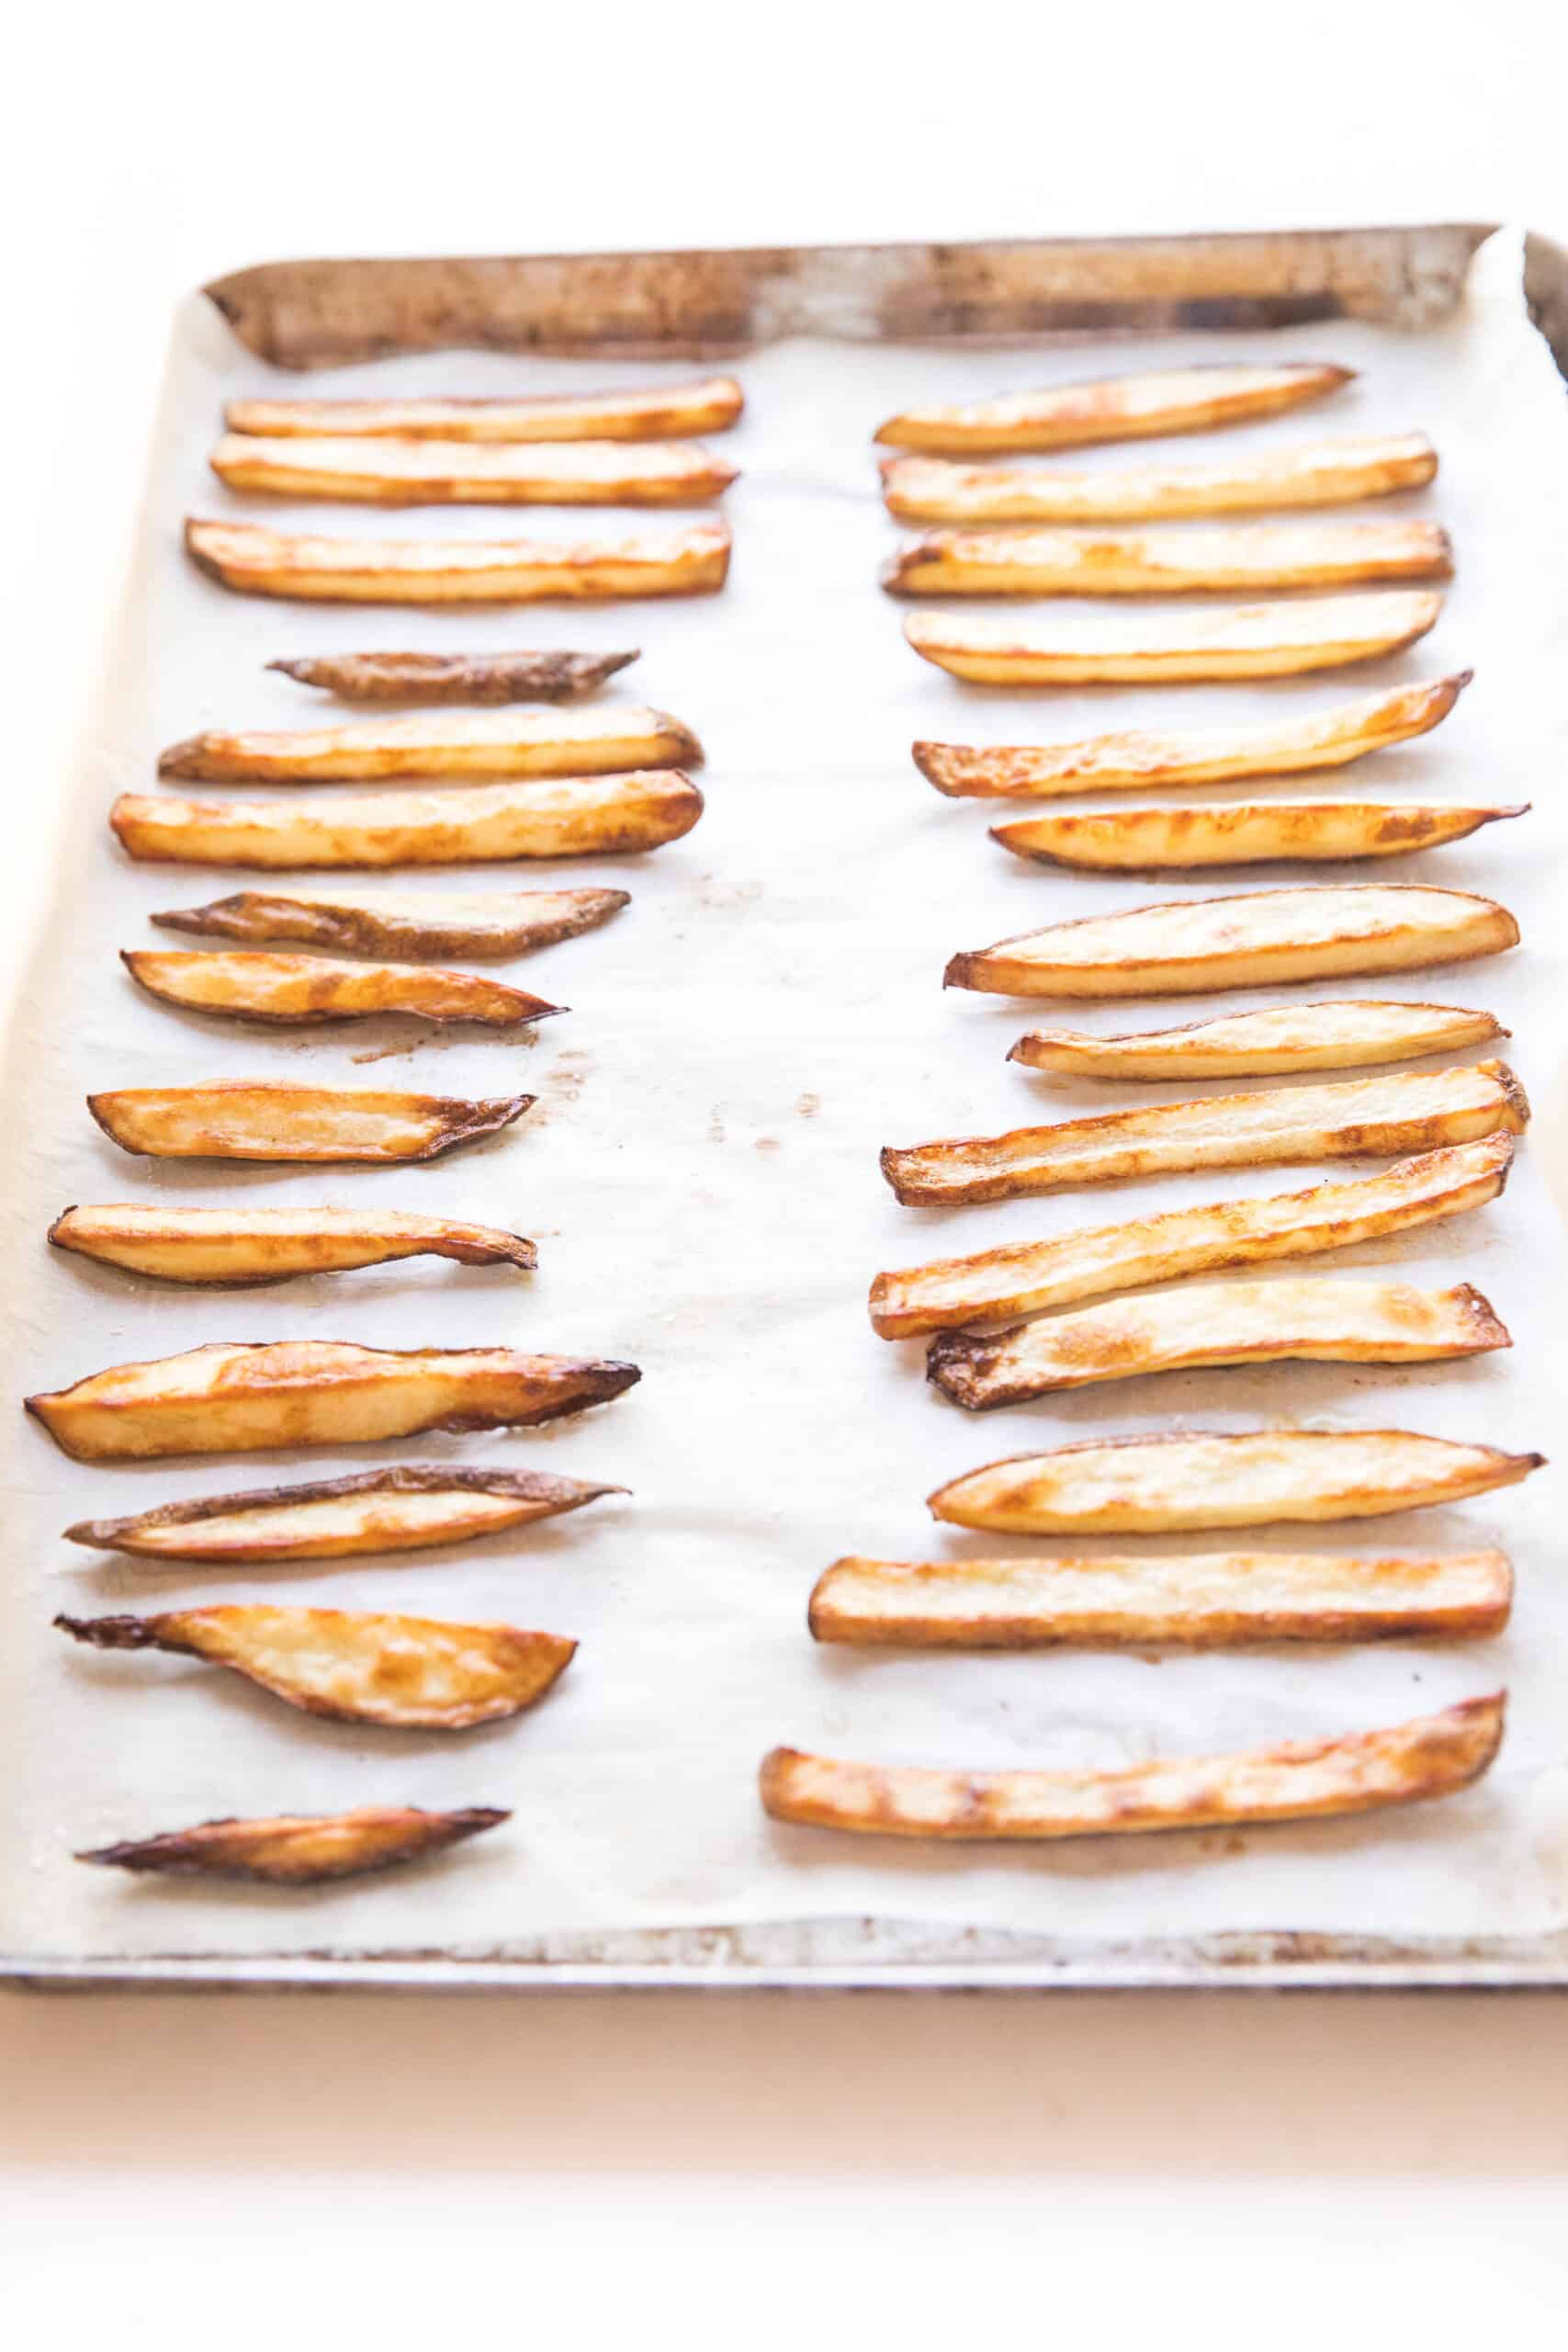 baked french fries on a rimmed baking sheet